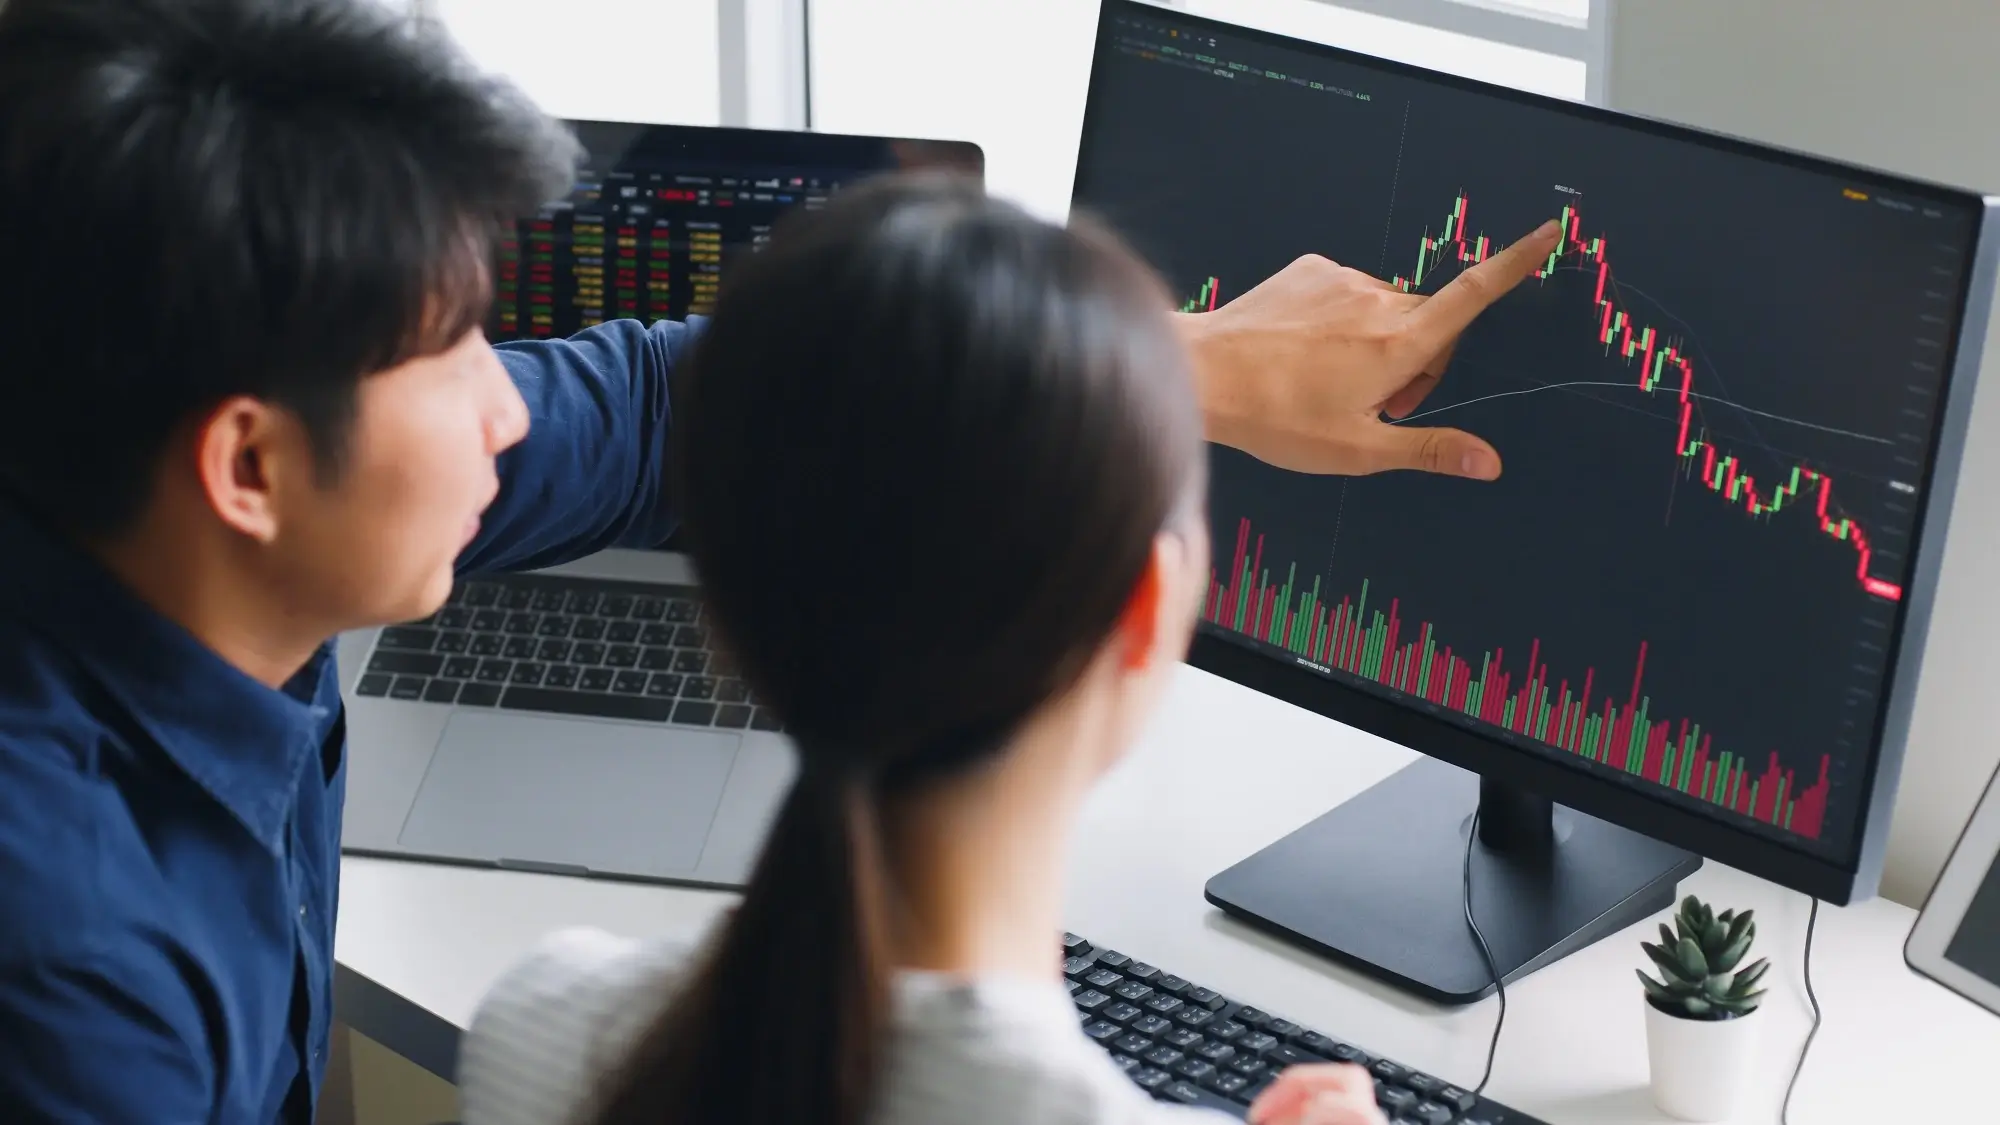 Investors discussing a stock chart on a computer, monitoring stock charts, representing what is stock trading.